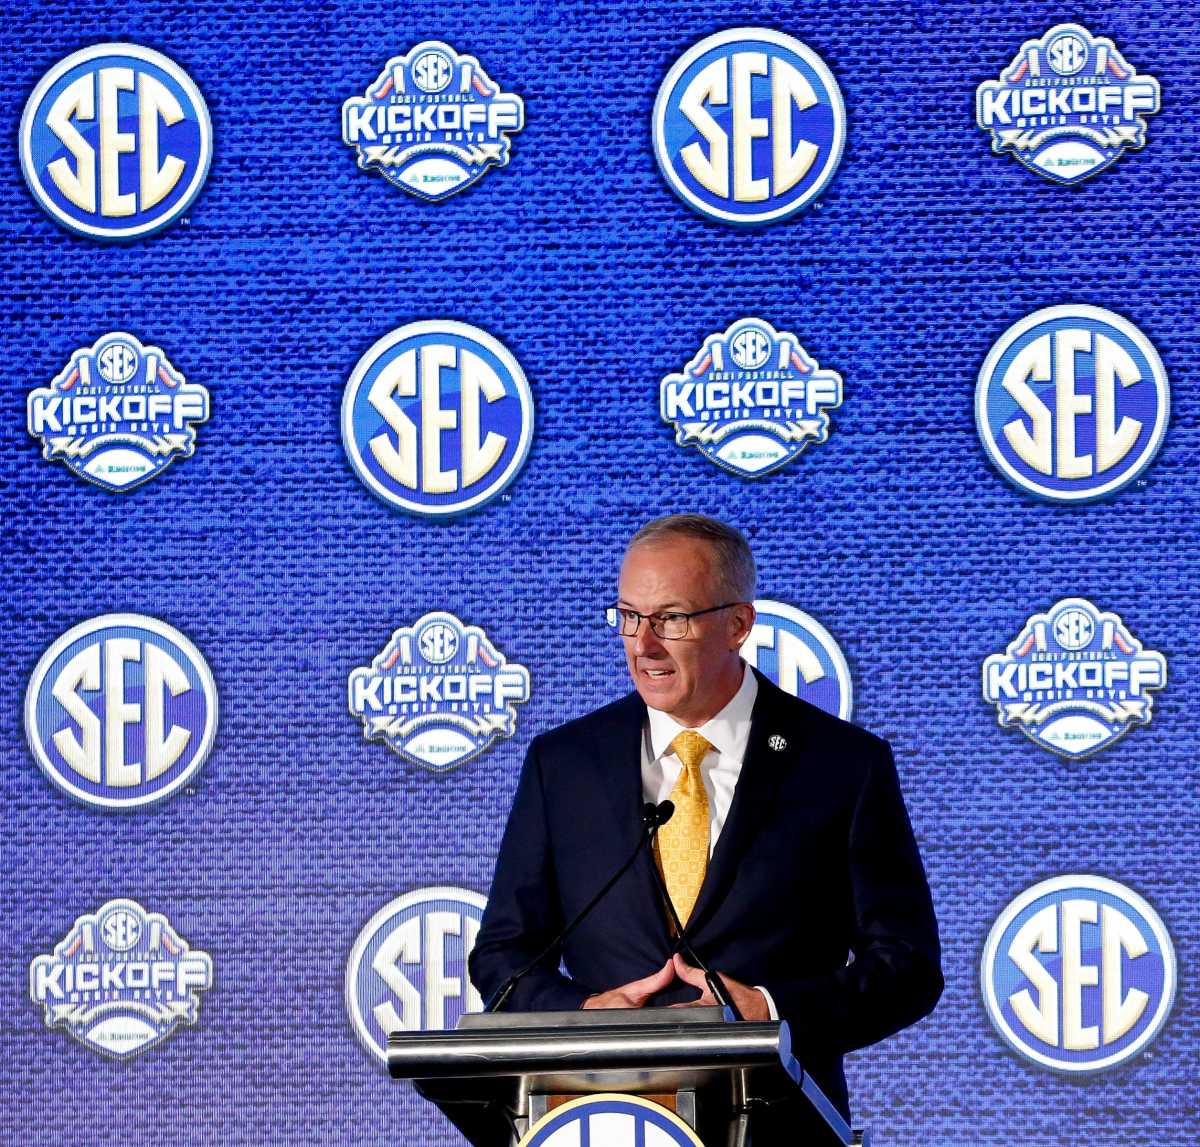 SEC commissioner Greg Sankey is still in favor of keeping the current four-time Playoff format.